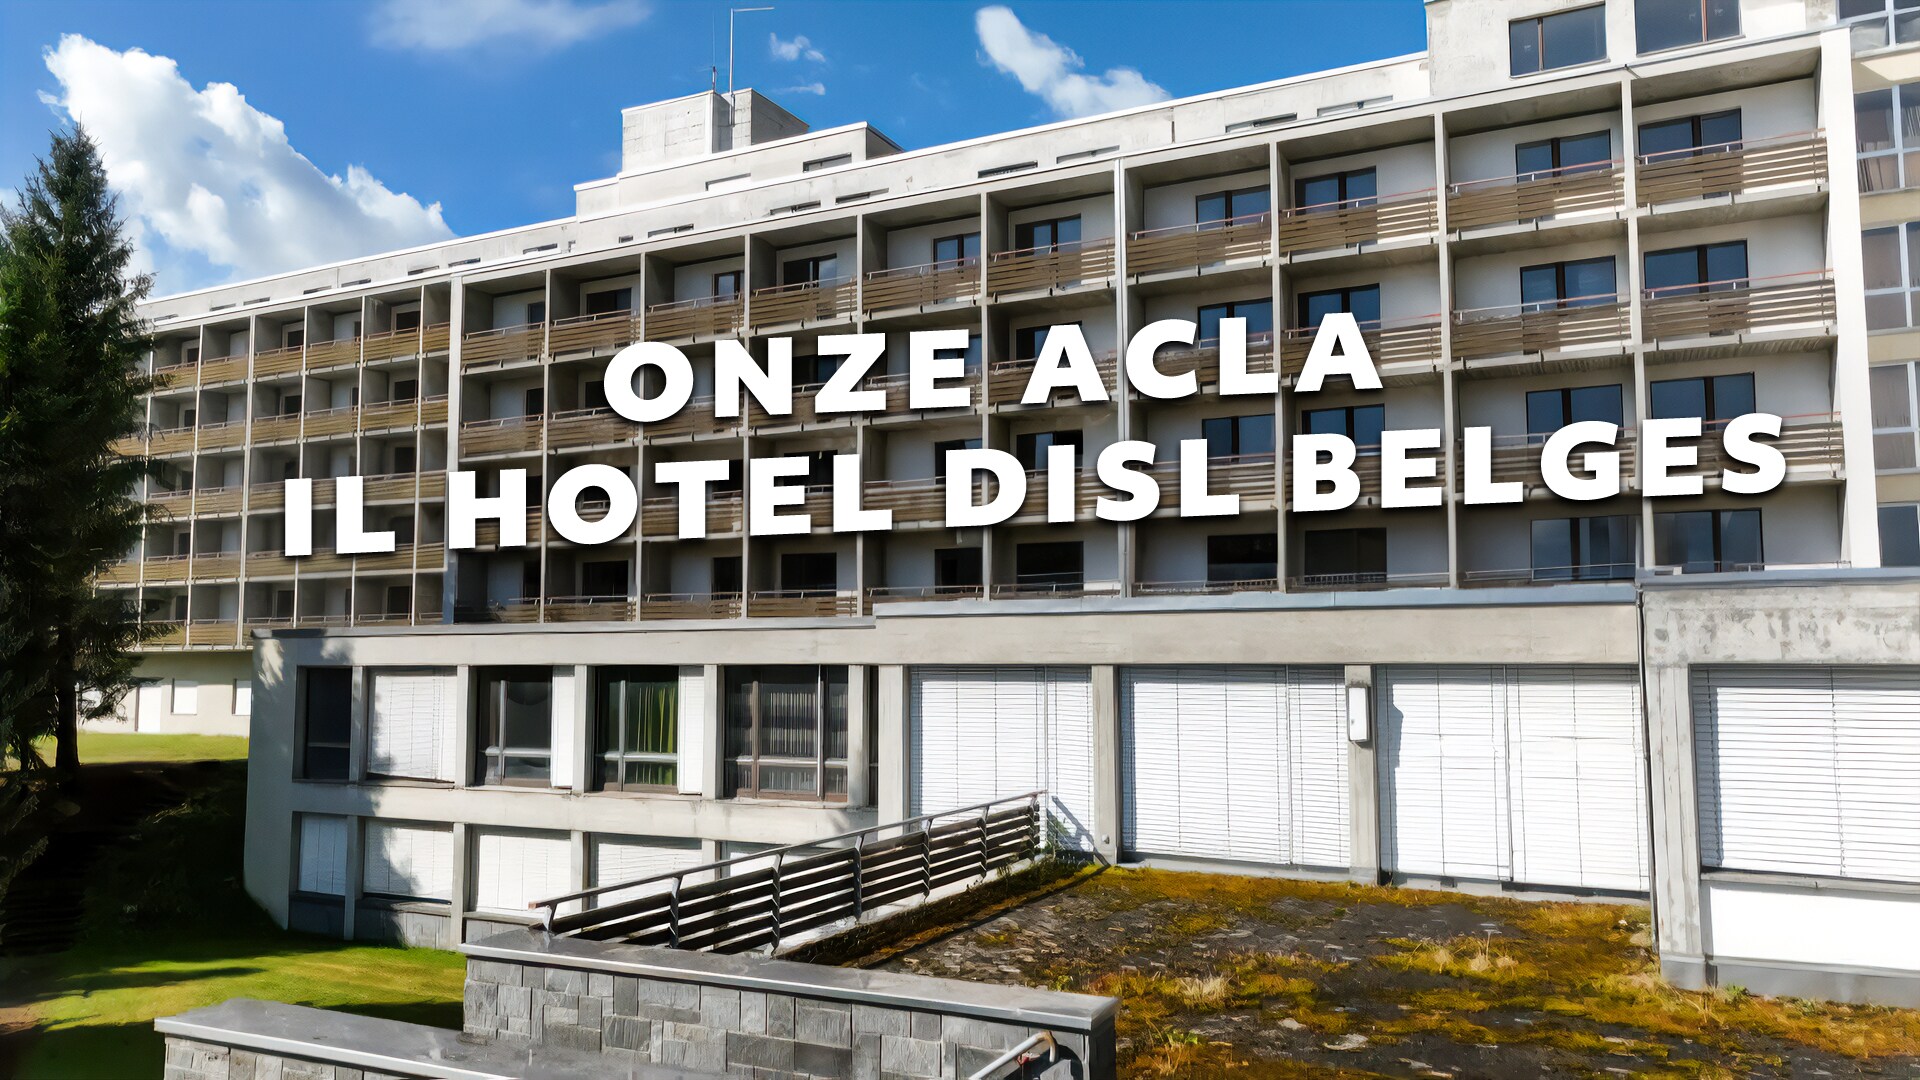 Onze Acla - il hotel dils Belges